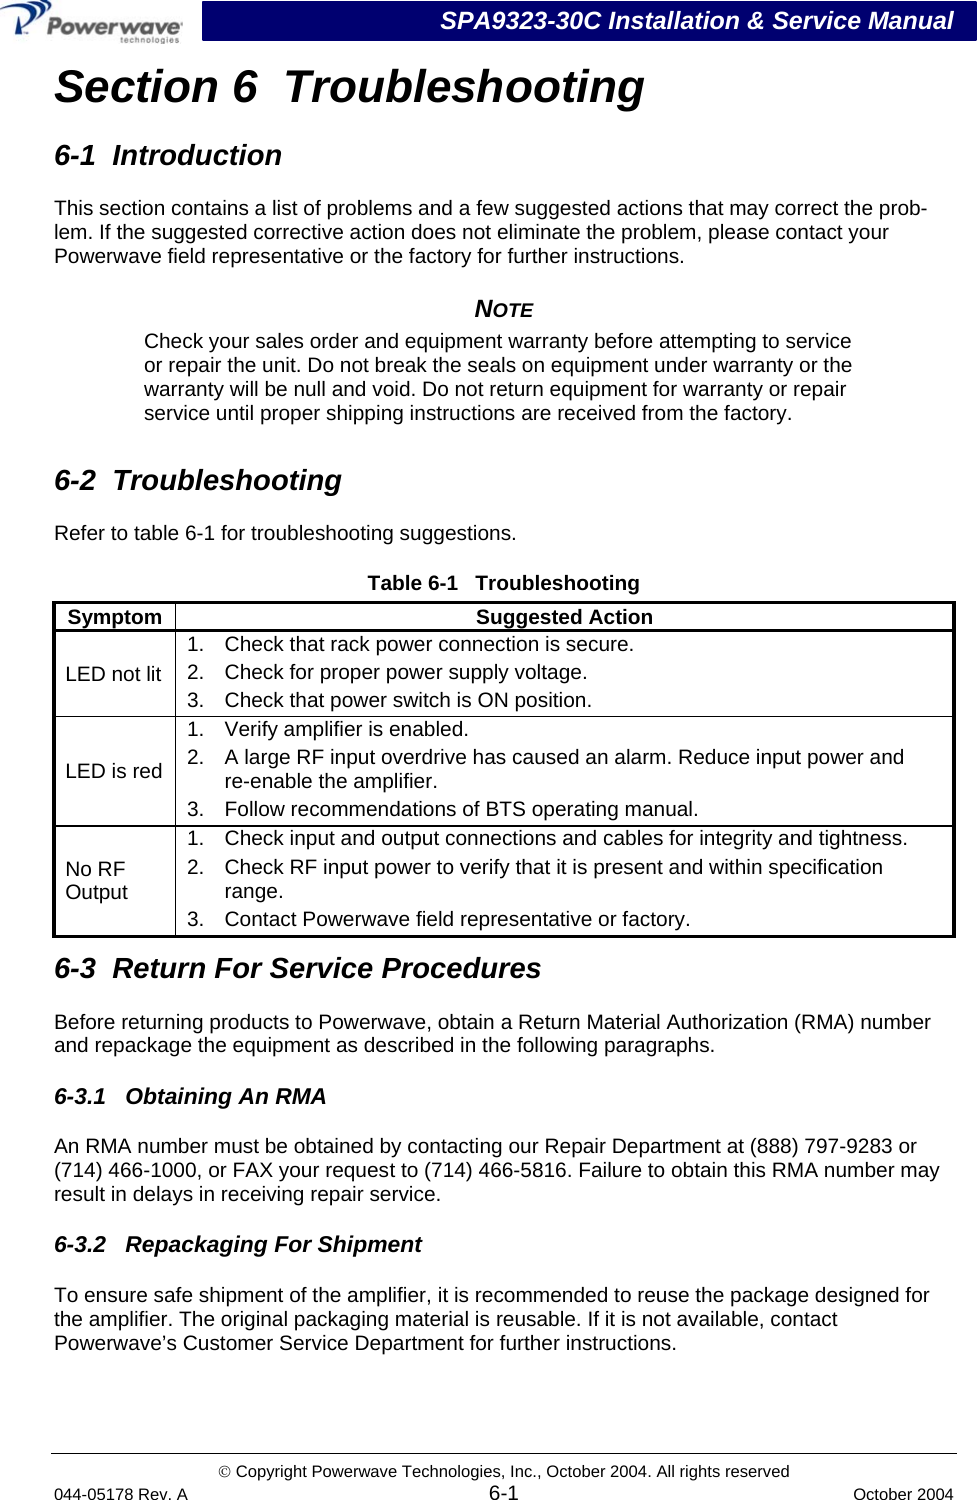 SPA9323-30C Installation &amp; Service Manual © Copyright Powerwave Technologies, Inc., October 2004. All rights reserved 044-05178 Rev. A 6-1  October 2004 Section 6  Troubleshooting 6-1  Introduction This section contains a list of problems and a few suggested actions that may correct the prob-lem. If the suggested corrective action does not eliminate the problem, please contact your  Powerwave field representative or the factory for further instructions. NOTE Check your sales order and equipment warranty before attempting to service or repair the unit. Do not break the seals on equipment under warranty or the warranty will be null and void. Do not return equipment for warranty or repair service until proper shipping instructions are received from the factory.  6-2  Troubleshooting Refer to table 6-1 for troubleshooting suggestions. Table 6-1   Troubleshooting Symptom Suggested Action LED not lit 1.  Check that rack power connection is secure. 2.  Check for proper power supply voltage. 3.  Check that power switch is ON position. LED is red 1.  Verify amplifier is enabled. 2.  A large RF input overdrive has caused an alarm. Reduce input power and  re-enable the amplifier. 3.  Follow recommendations of BTS operating manual. No RF Output 1.  Check input and output connections and cables for integrity and tightness. 2.  Check RF input power to verify that it is present and within specification range. 3.  Contact Powerwave field representative or factory. 6-3  Return For Service Procedures Before returning products to Powerwave, obtain a Return Material Authorization (RMA) number and repackage the equipment as described in the following paragraphs. 6-3.1   Obtaining An RMA An RMA number must be obtained by contacting our Repair Department at (888) 797-9283 or (714) 466-1000, or FAX your request to (714) 466-5816. Failure to obtain this RMA number may result in delays in receiving repair service. 6-3.2   Repackaging For Shipment To ensure safe shipment of the amplifier, it is recommended to reuse the package designed for the amplifier. The original packaging material is reusable. If it is not available, contact  Powerwave’s Customer Service Department for further instructions. 